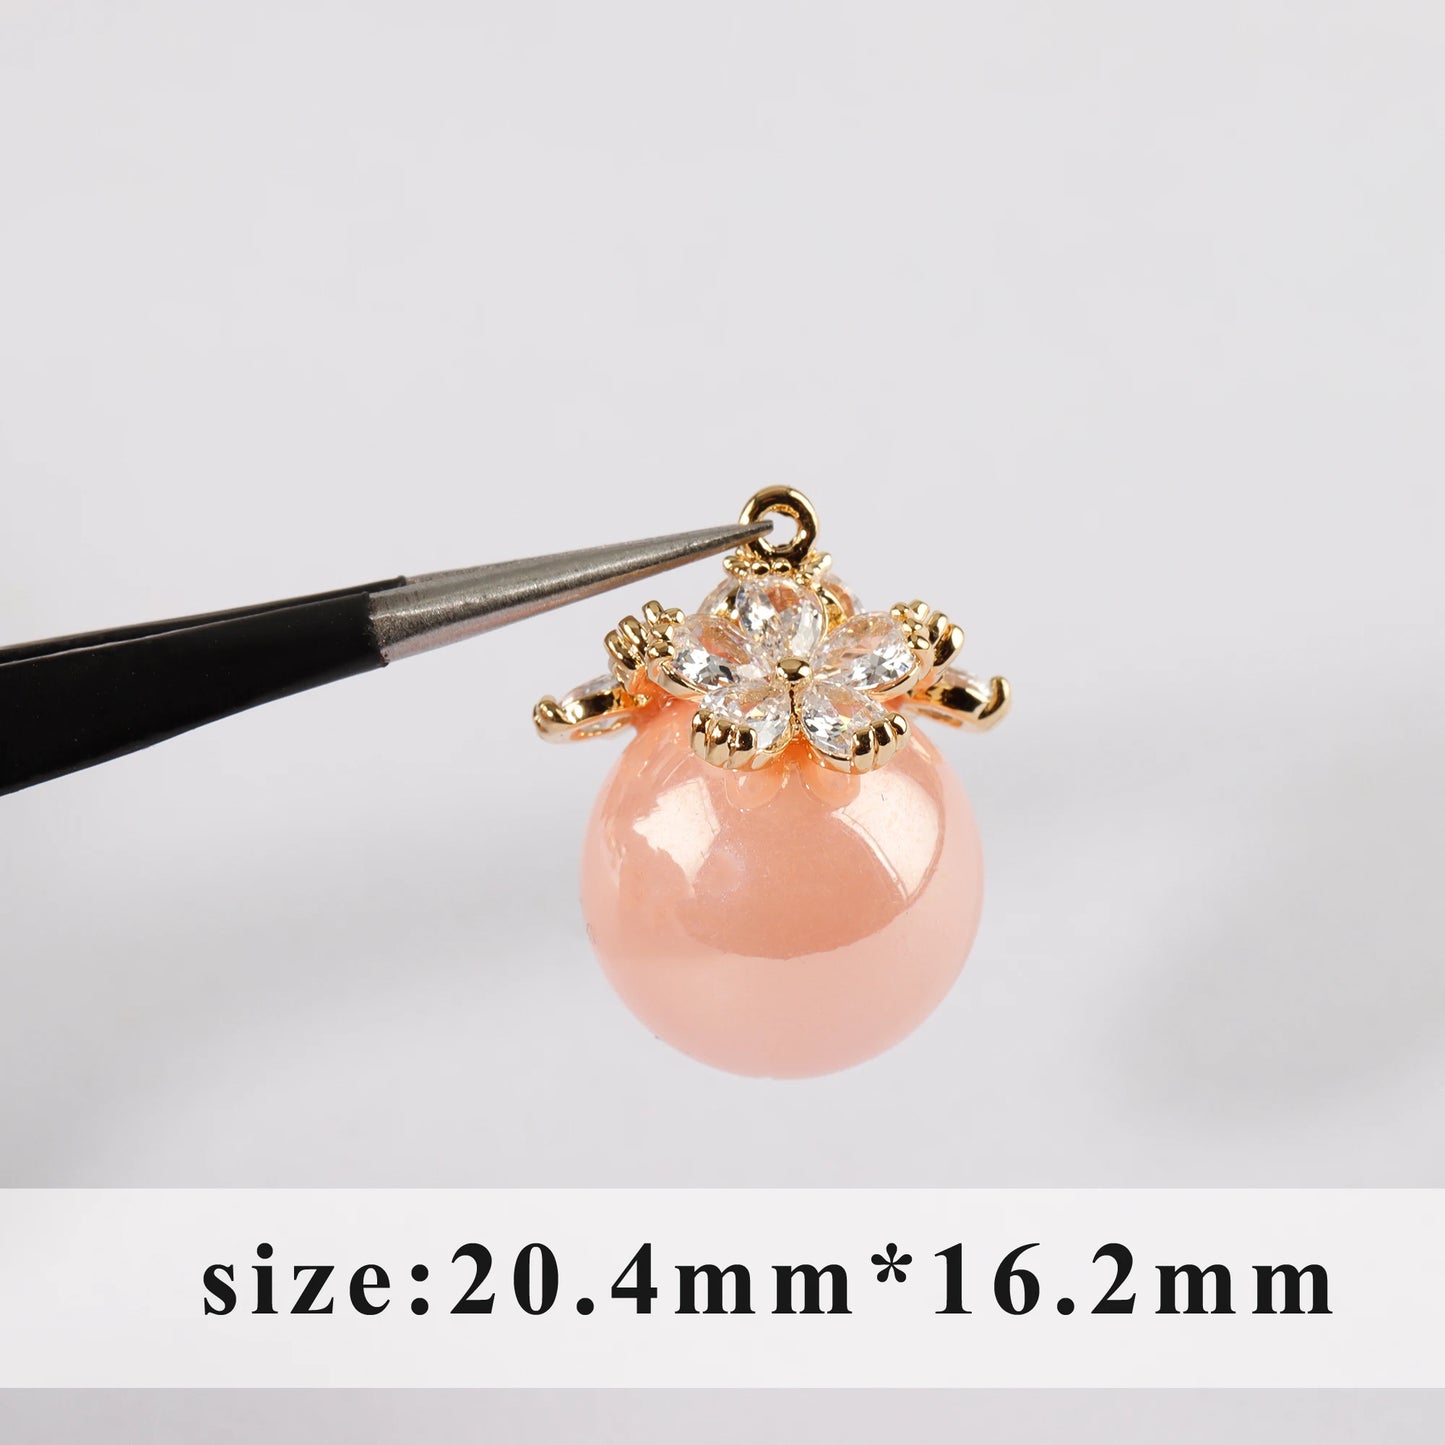 GUFEATHER M935,jewelry accessories,18k gold plated,zircon,plastic pearl,charms,hand made,diy earrings,jewelry making,6pcs/lot